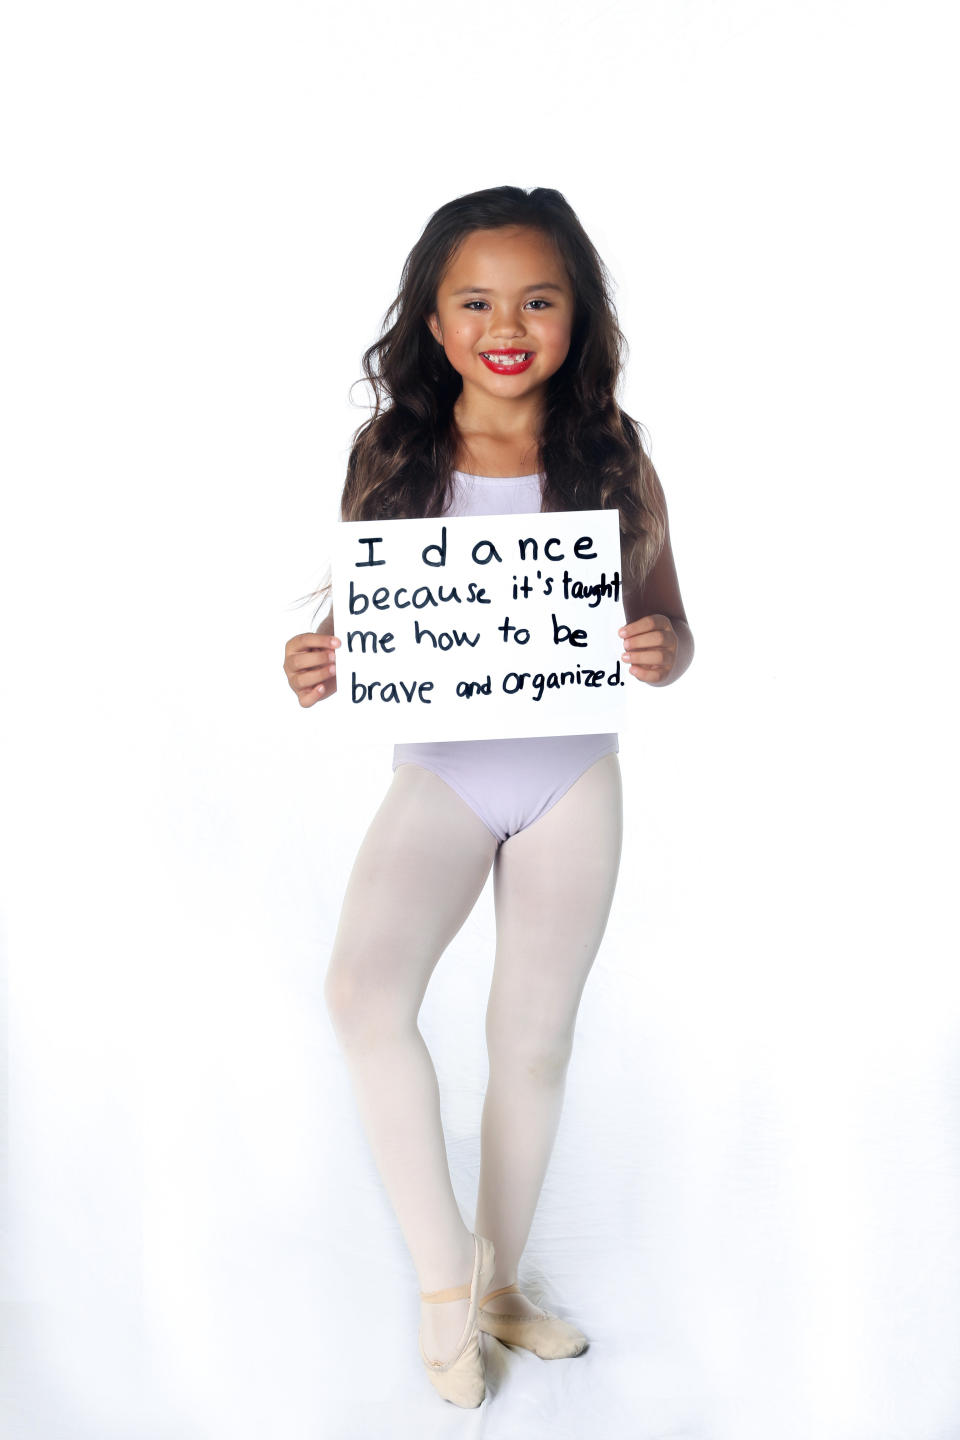 Johna Sejati  "I dance because it's taught me how to be brave and organized."